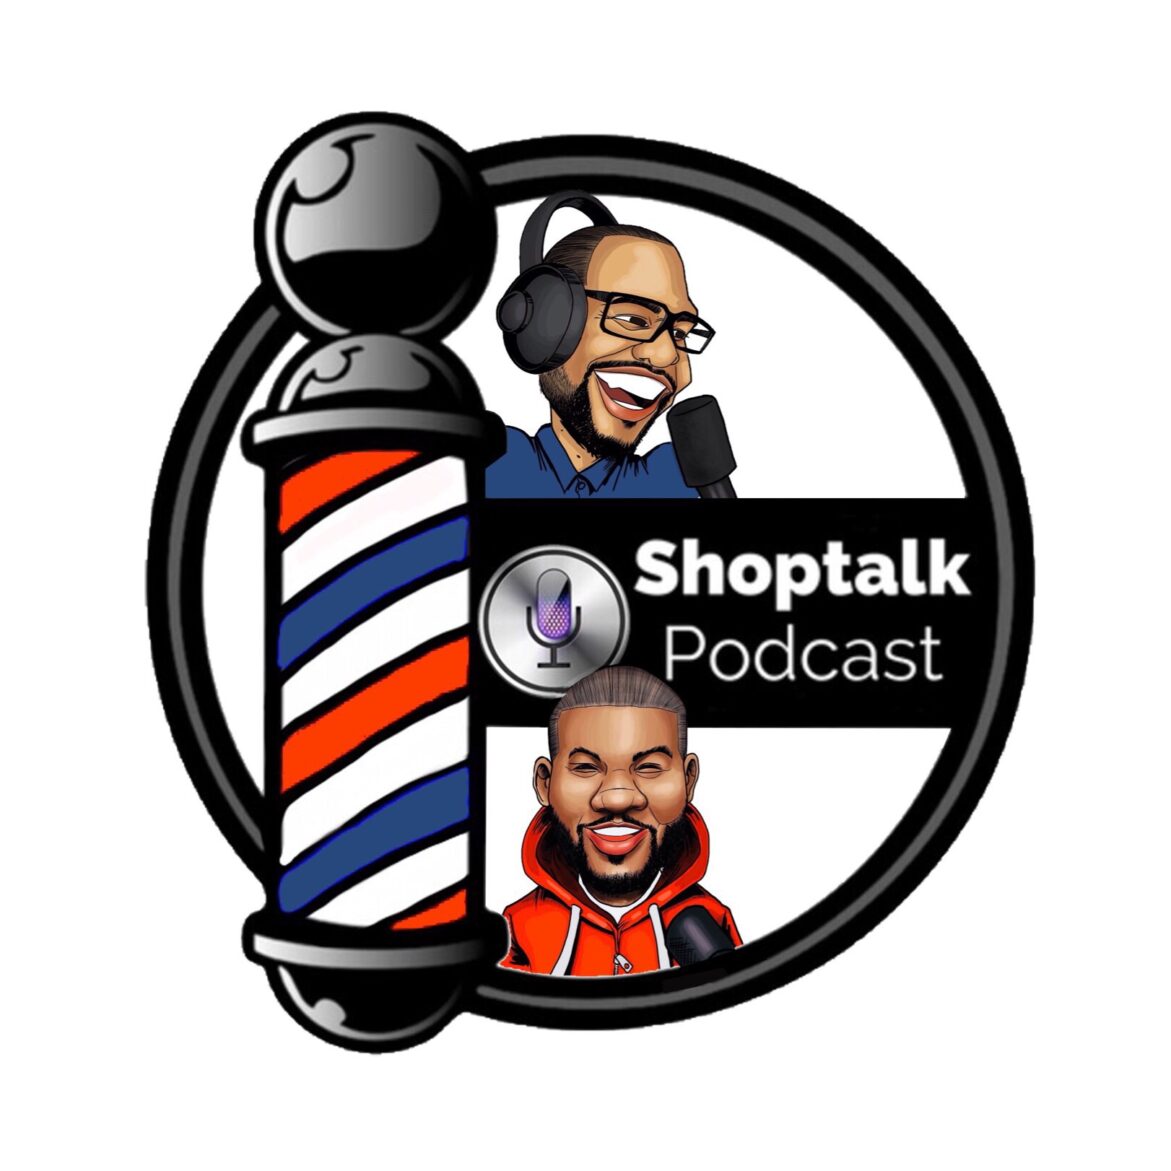 Black Podcasting - Shop Talk Podcast Episode 355 - Overhyped or Underhyped?